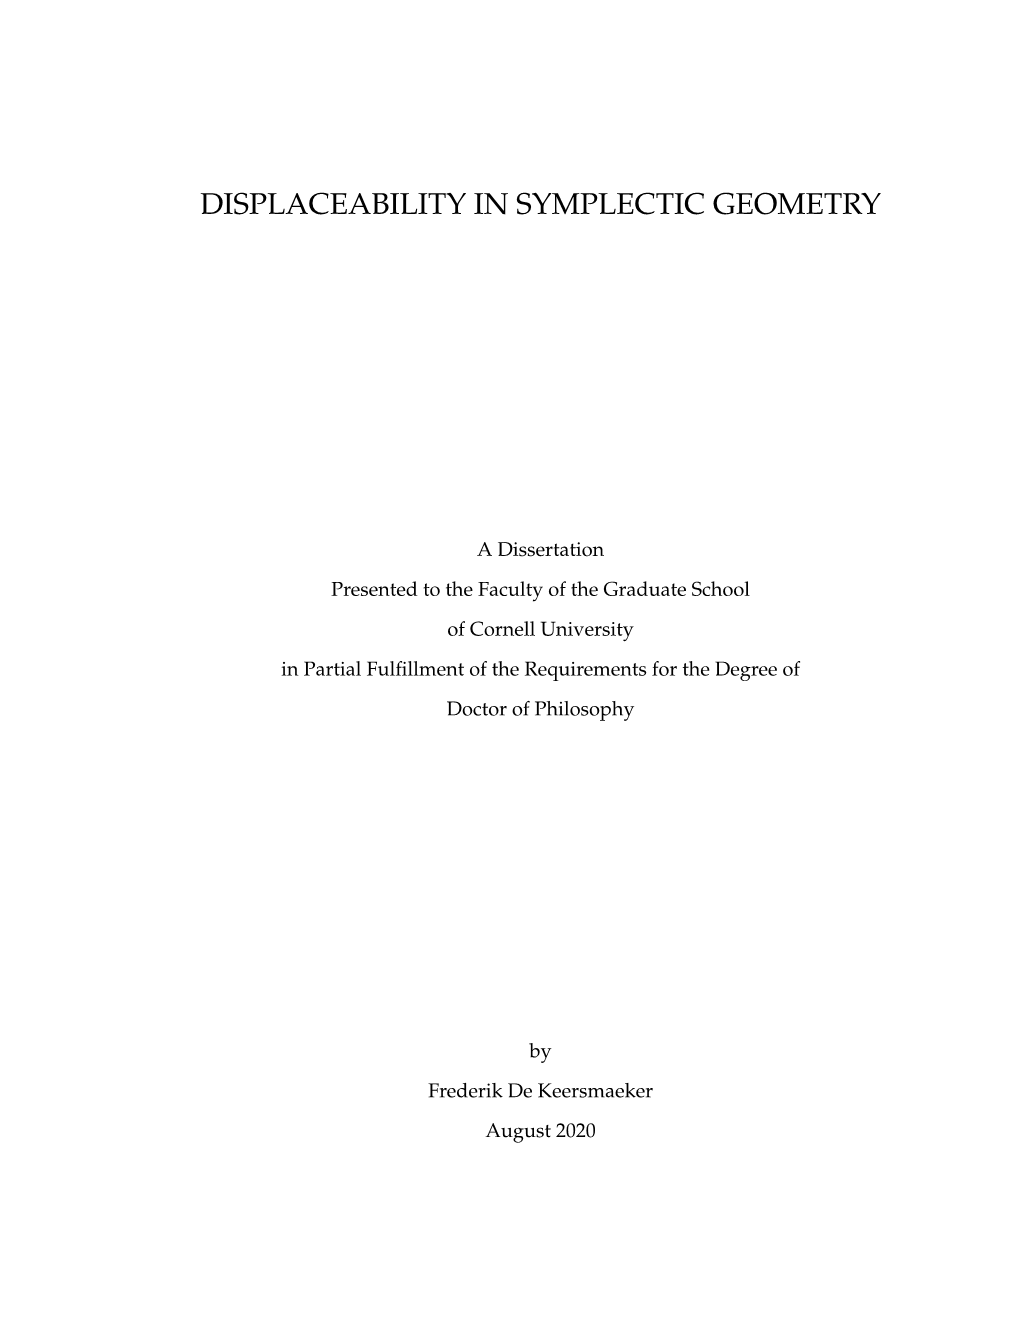 Displaceability in Symplectic Geometry